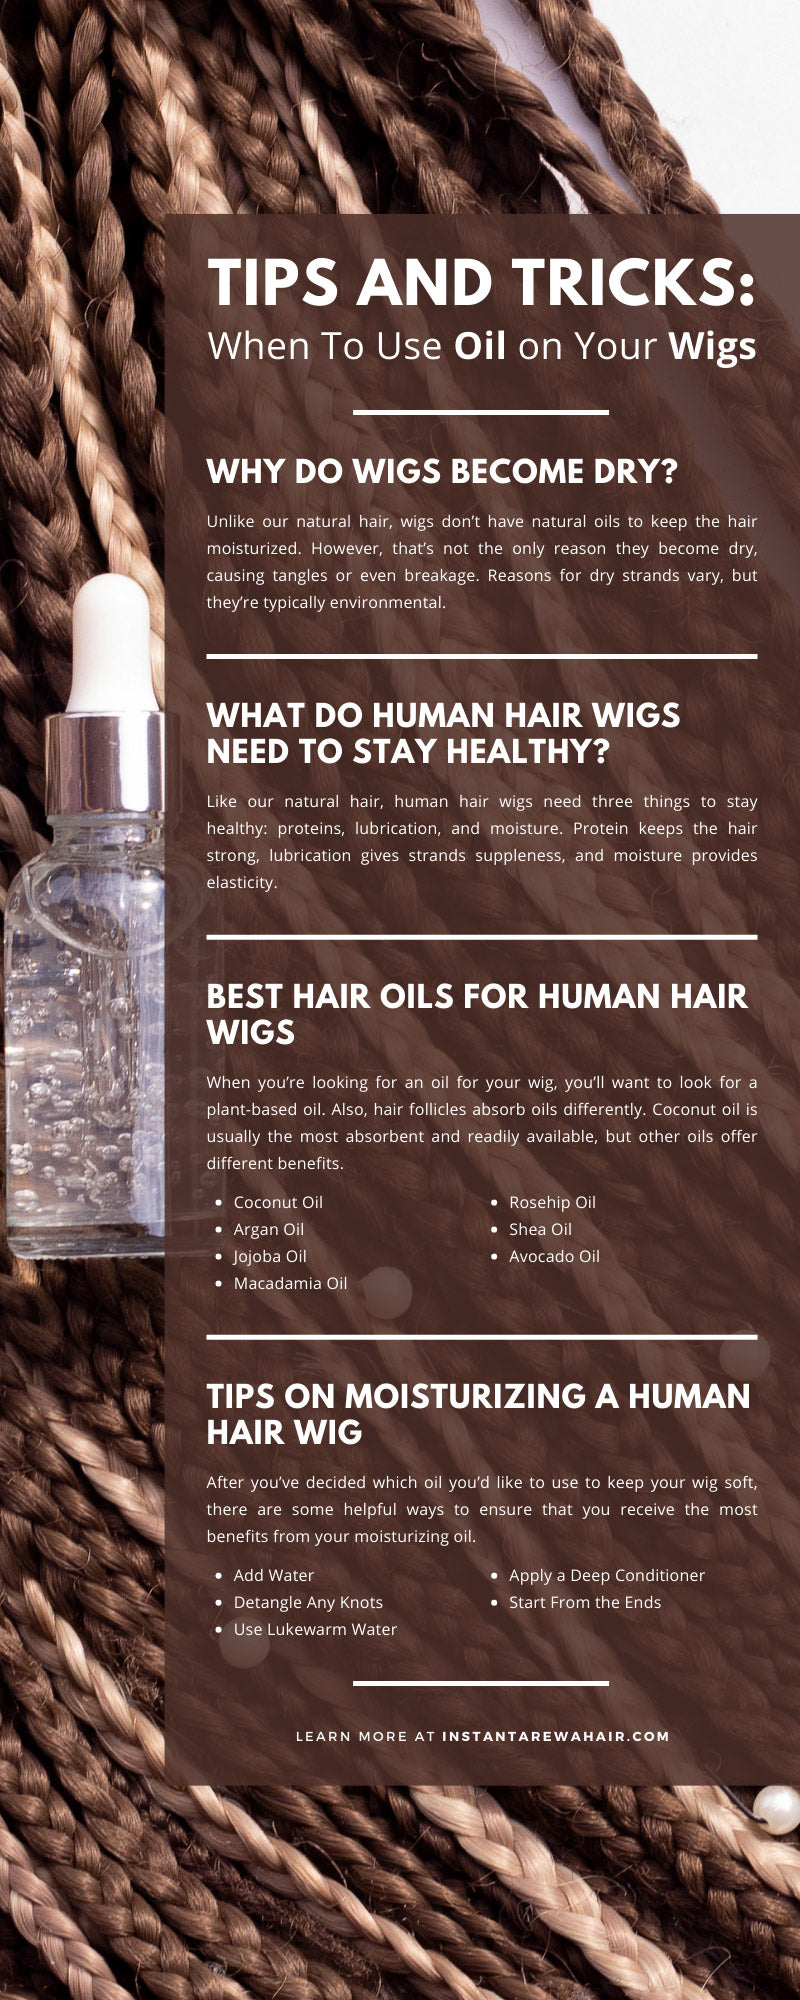 Tips and Tricks: When To Use Oil on Your Wigs